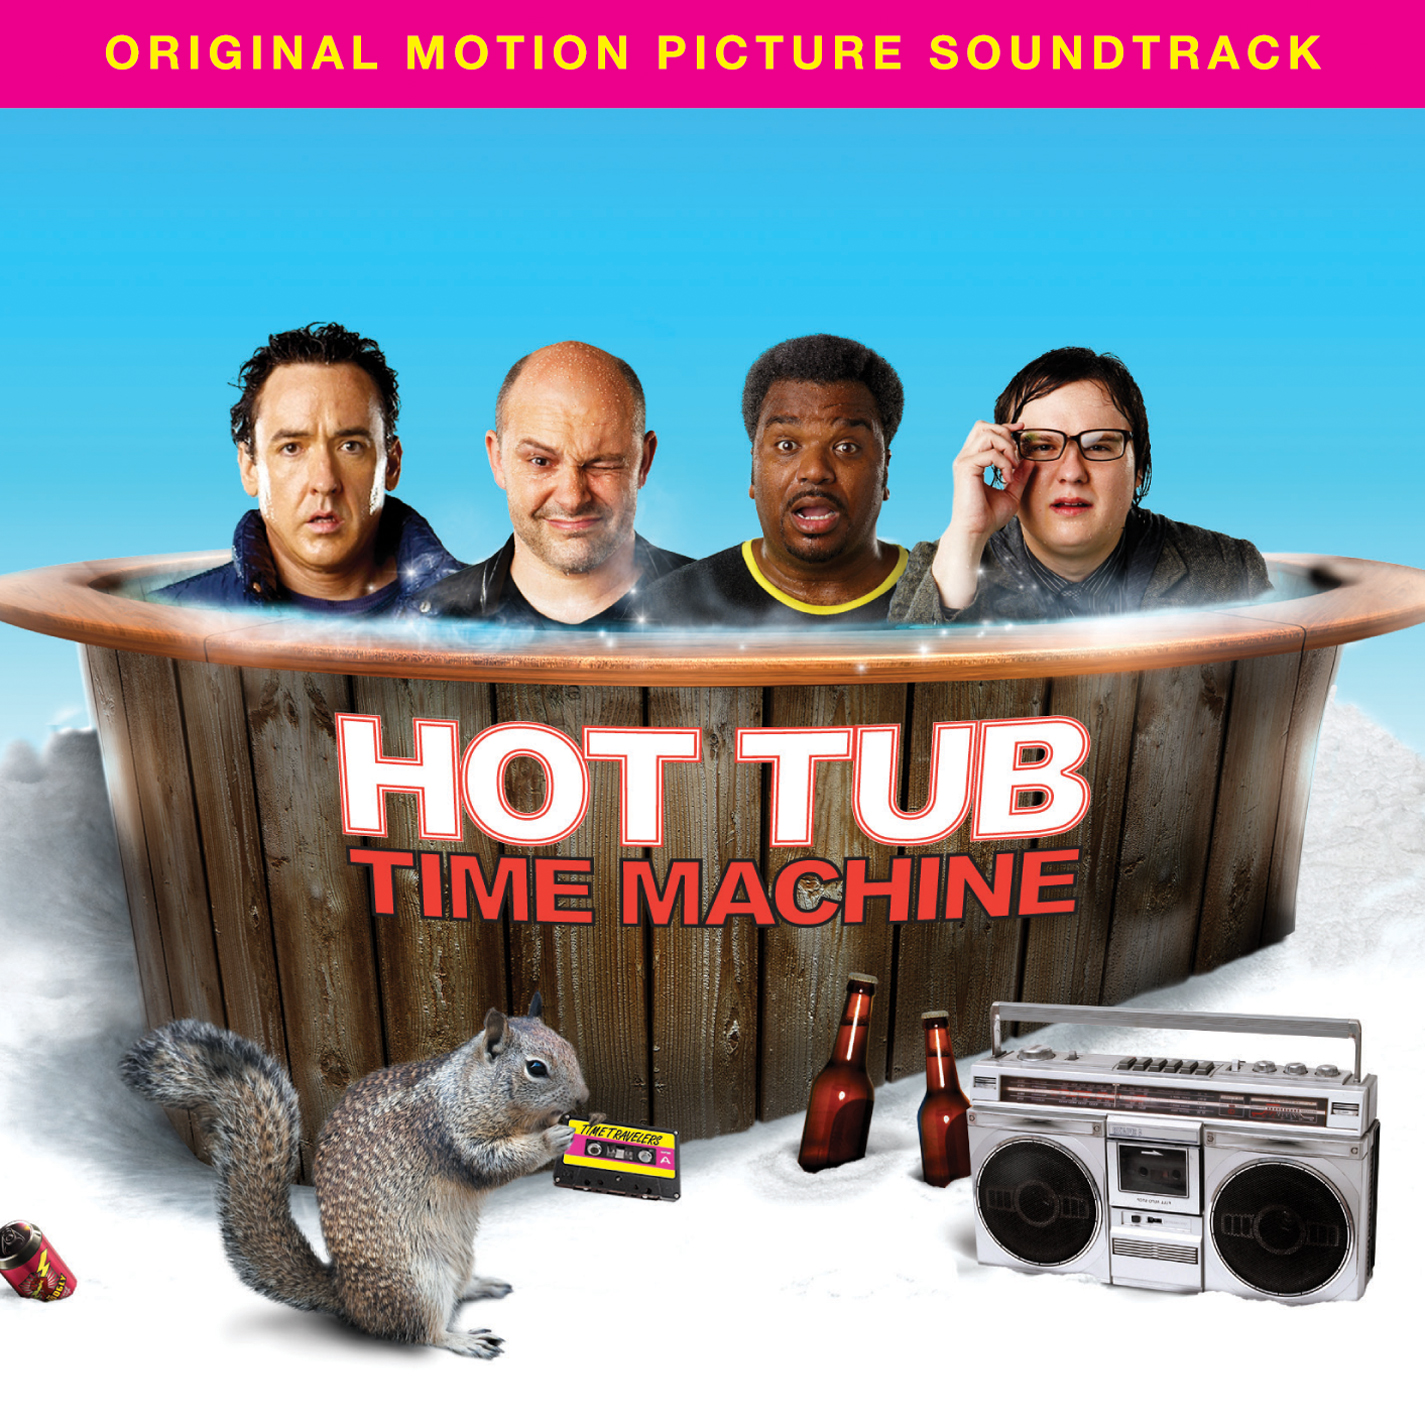 ‘Hot Tub Time Machine’ soundtrack features New Order, Replacements, Echo & Bunnymen